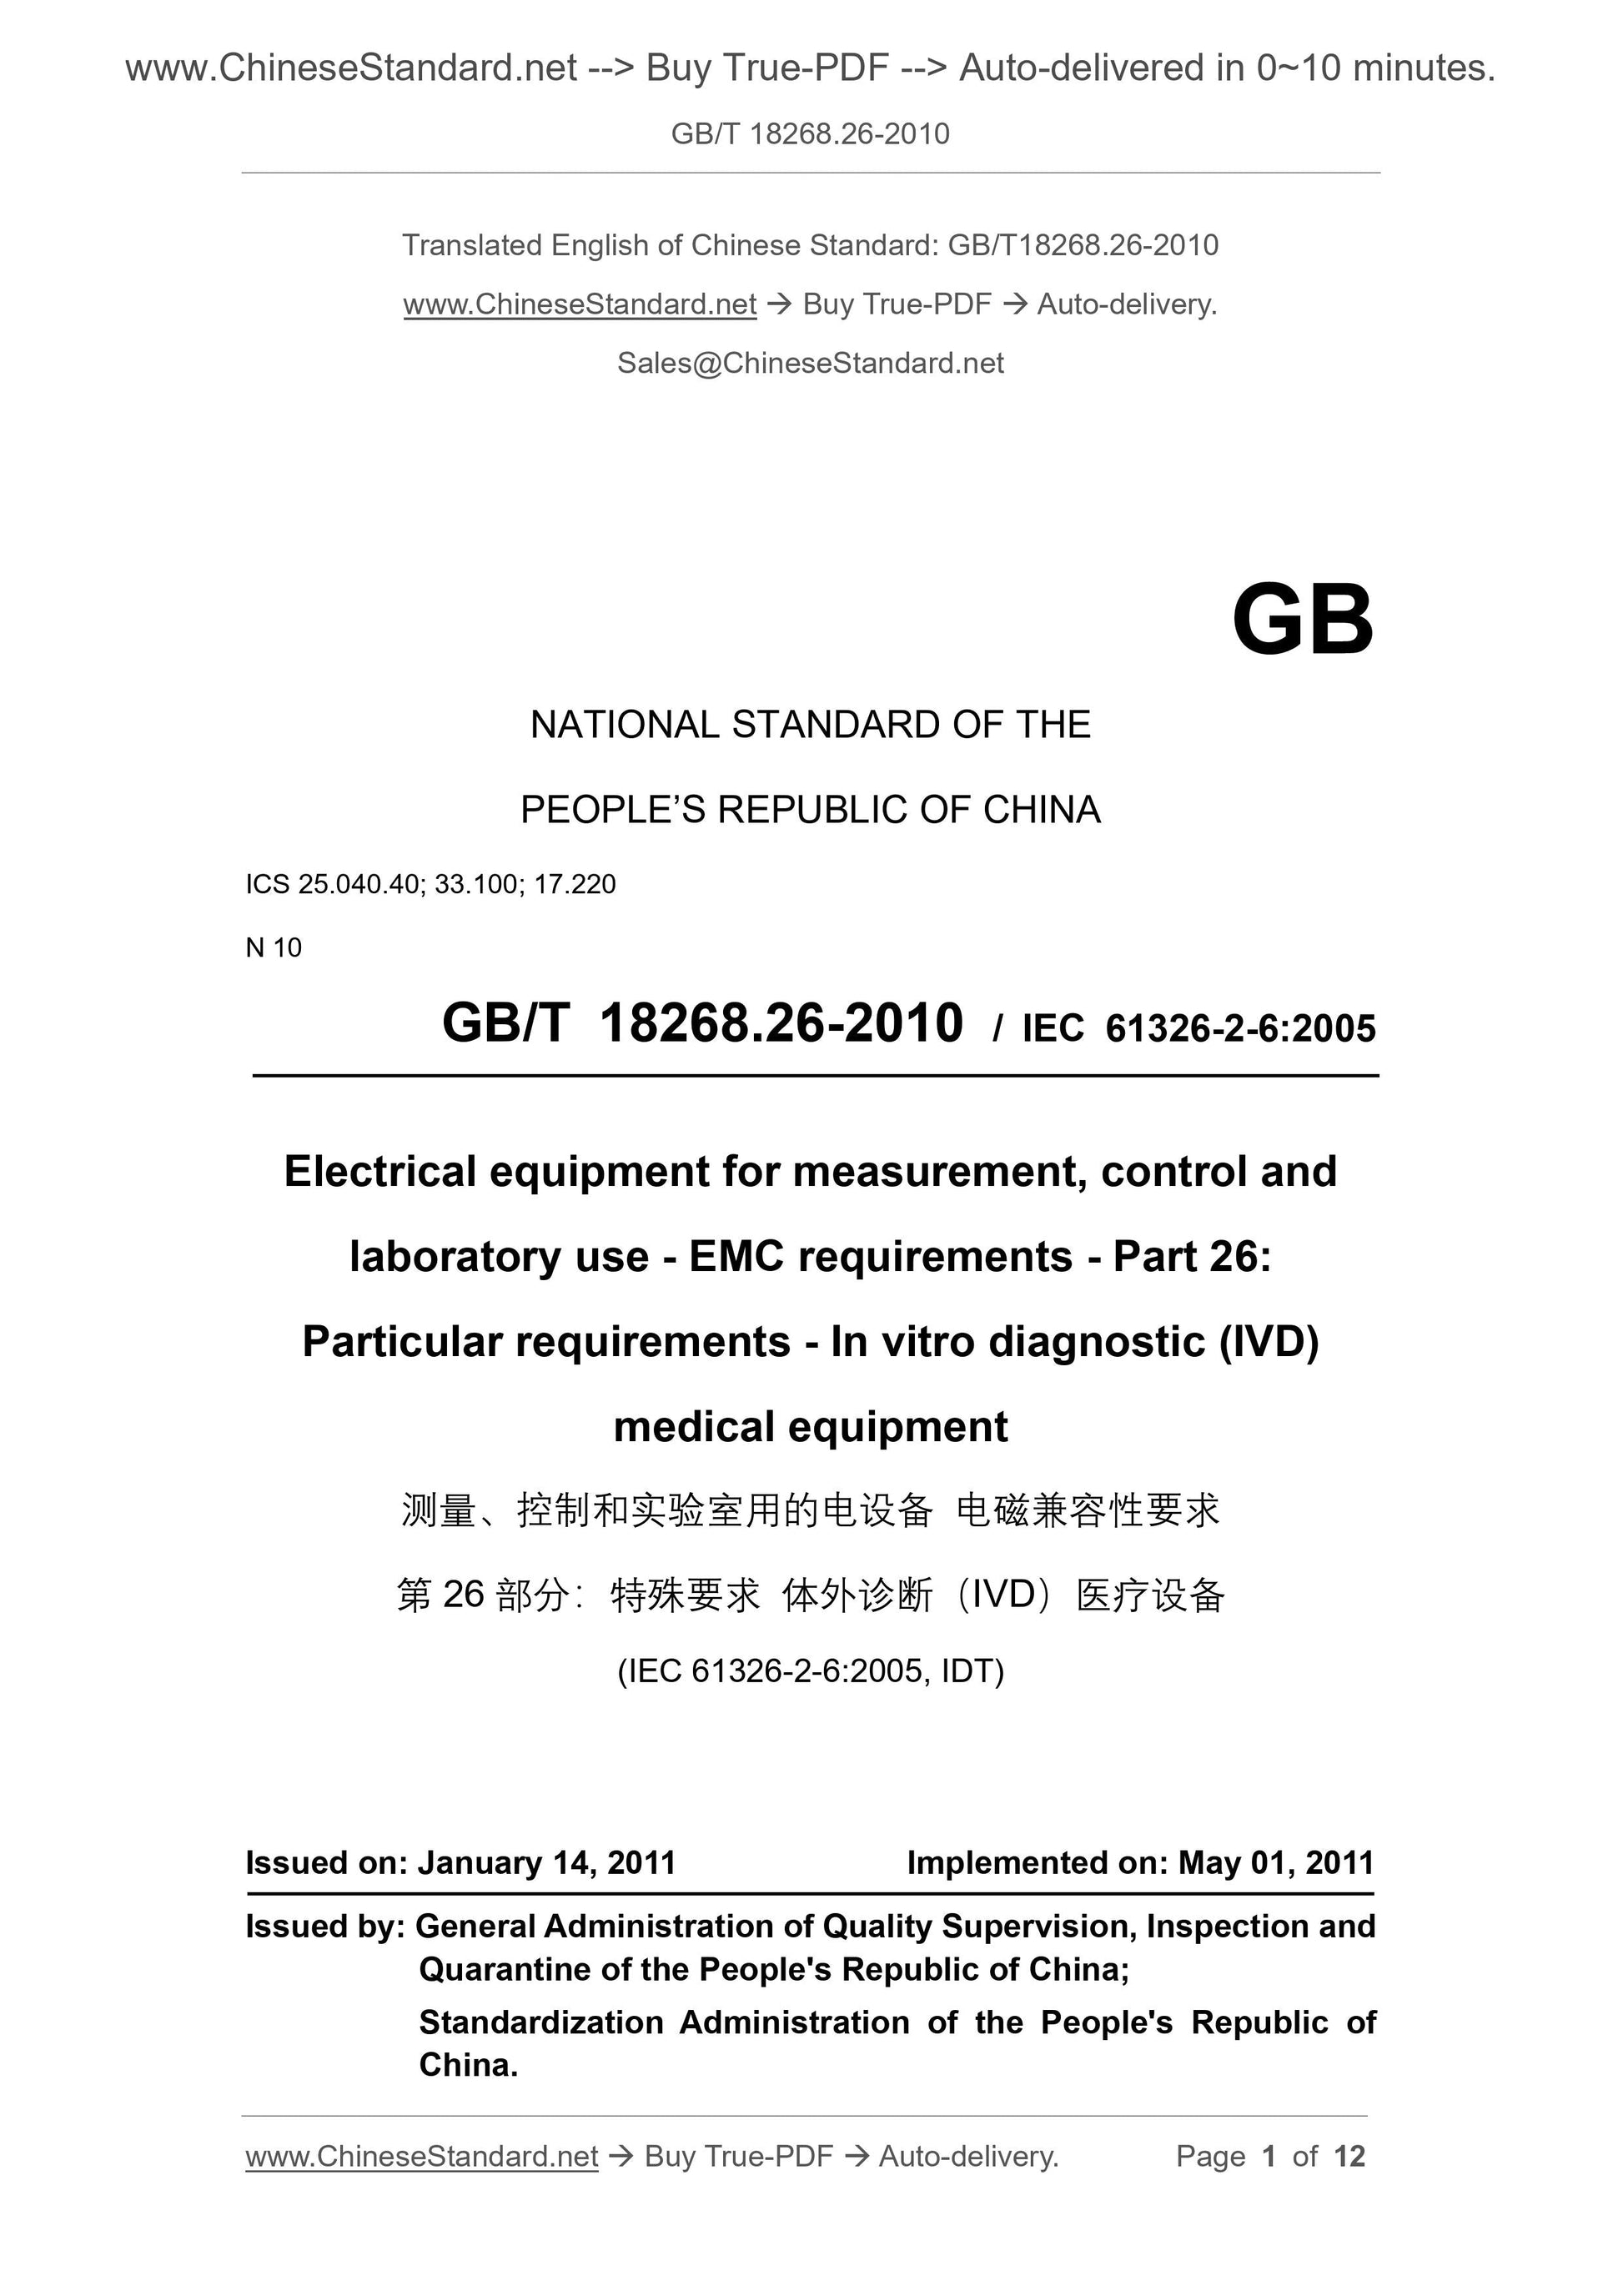 GB/T 18268.26-2010 Page 1